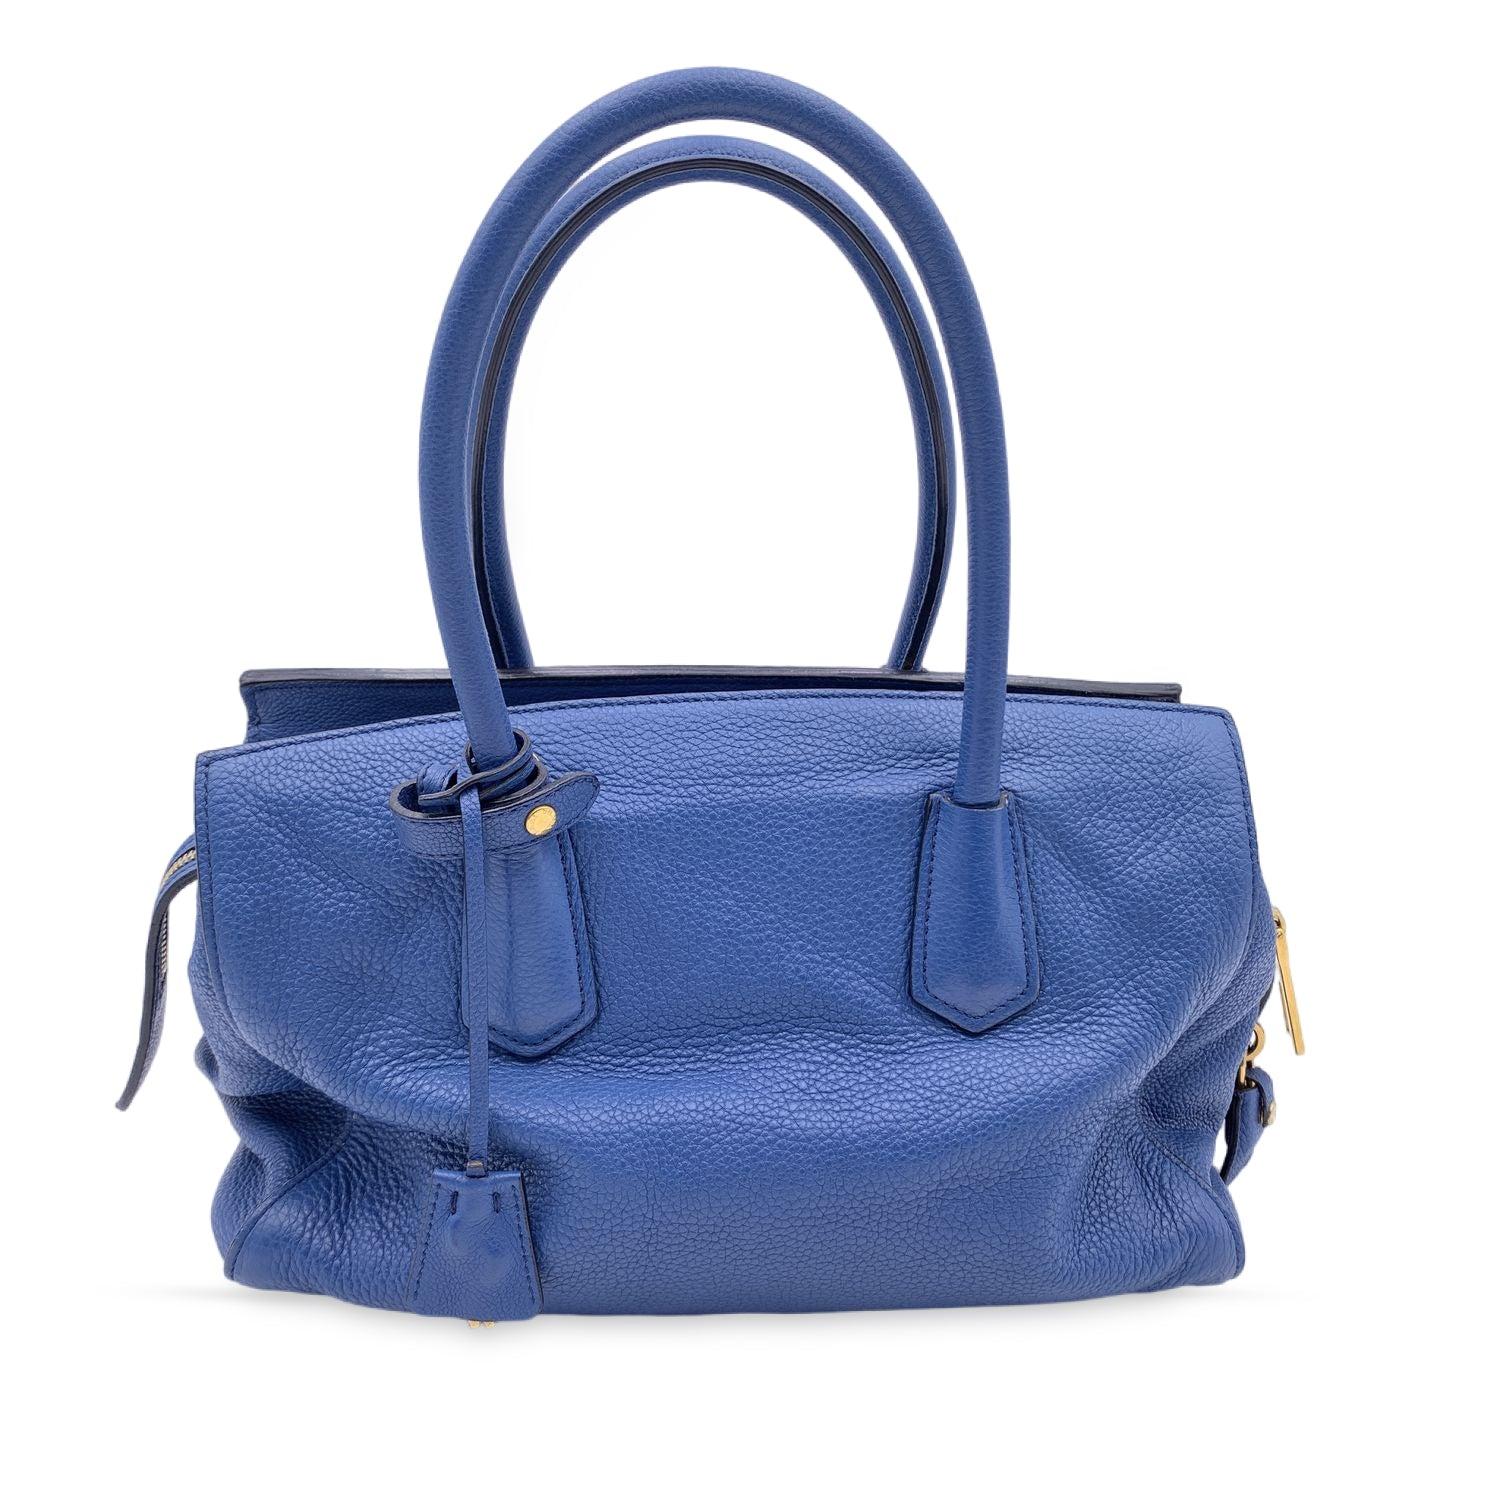 This beautiful Bag will come with a Certificate of Authenticity provided by Entrupy. The certificate will be provided at no further cost

Prada tote bag crafted out of pebbled leather in blue color (Prada official color is 'Inchiostro'). Gold metal